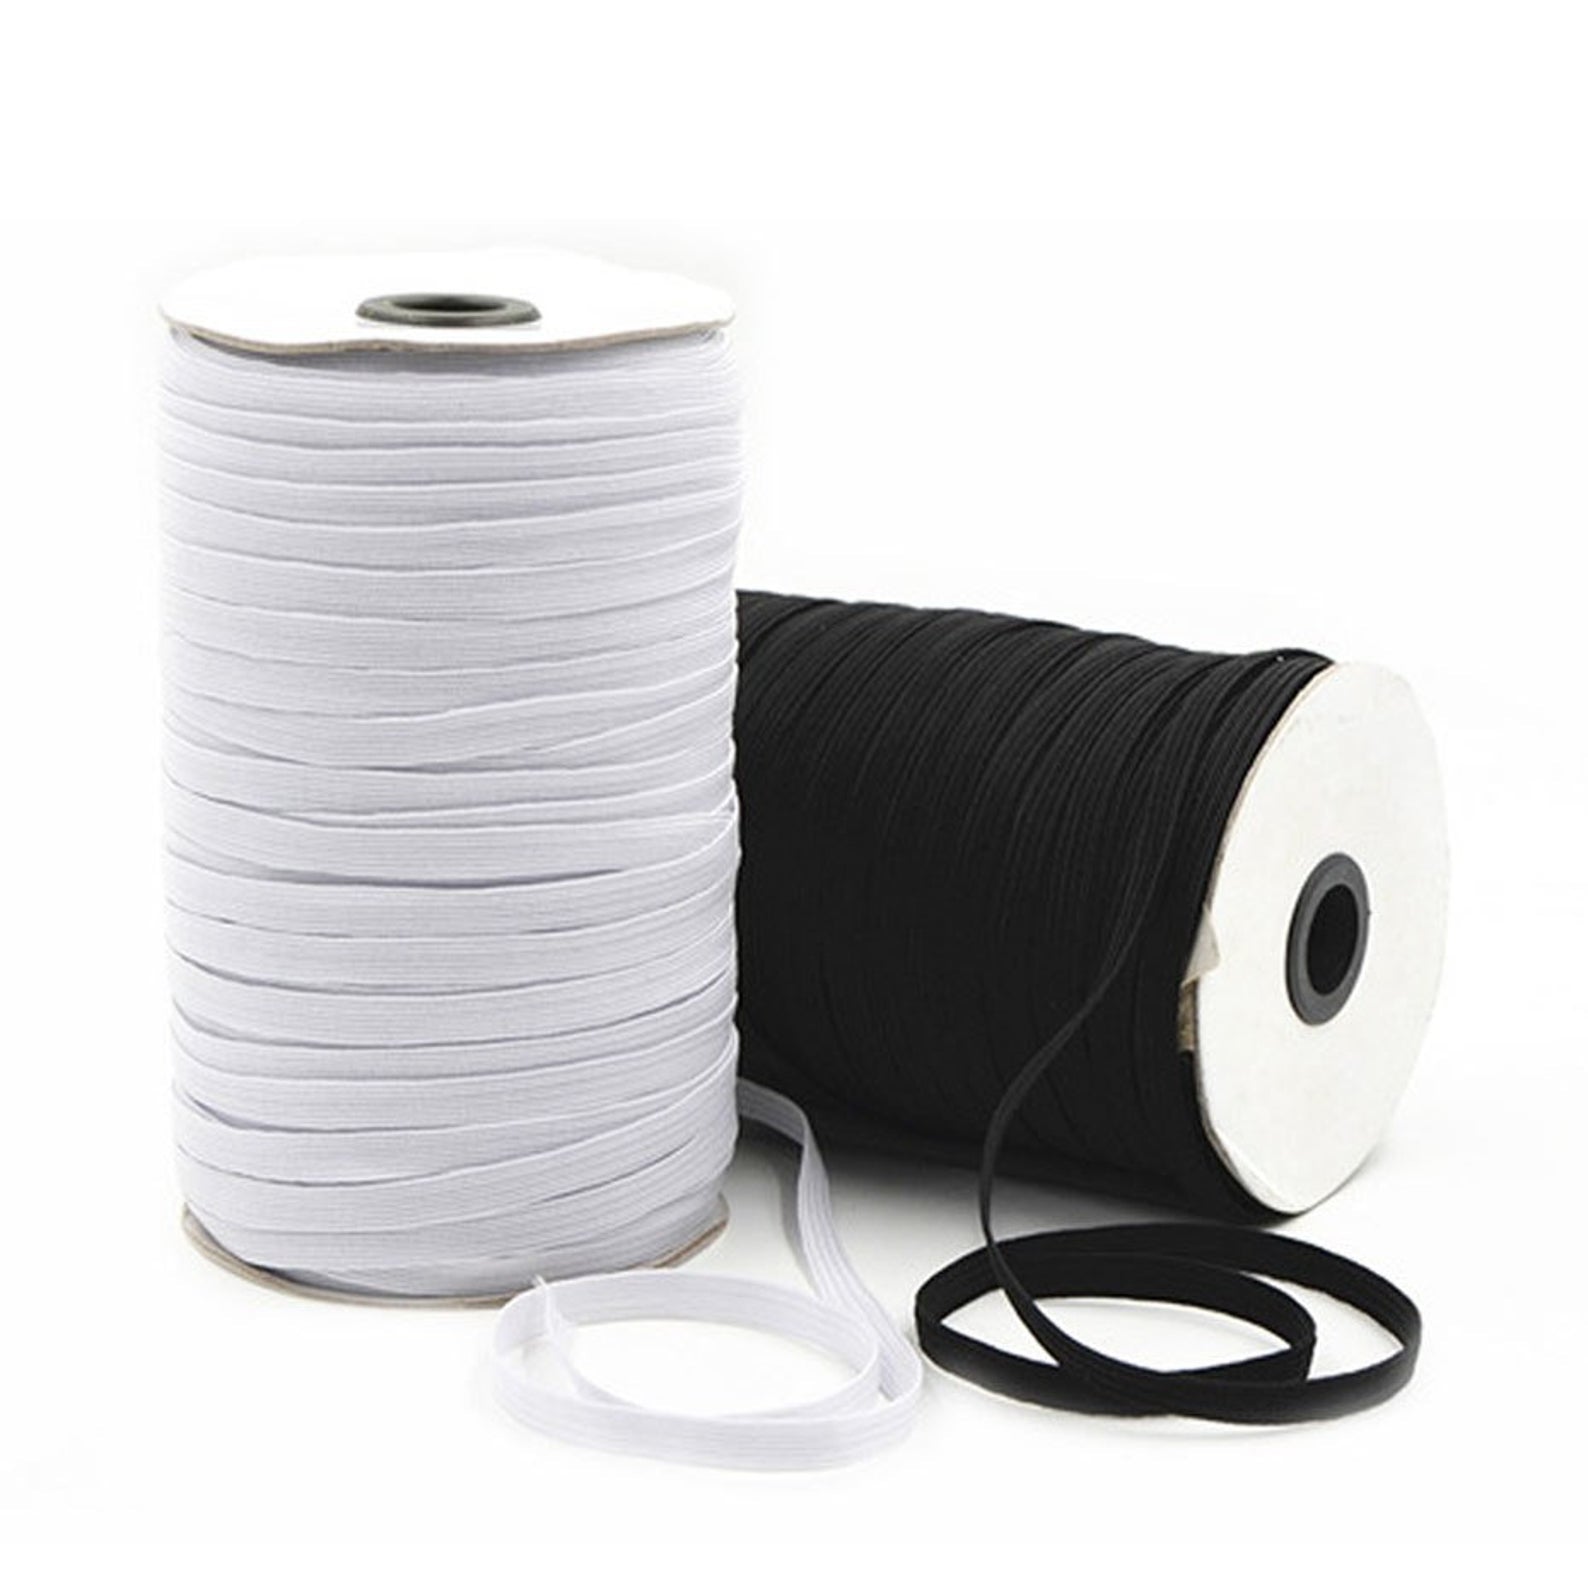 1/4 Sewing Elastic : Braided High Quality Non-Roll Chlorine & Acid Re –  Mondaes Makerspace & Supply